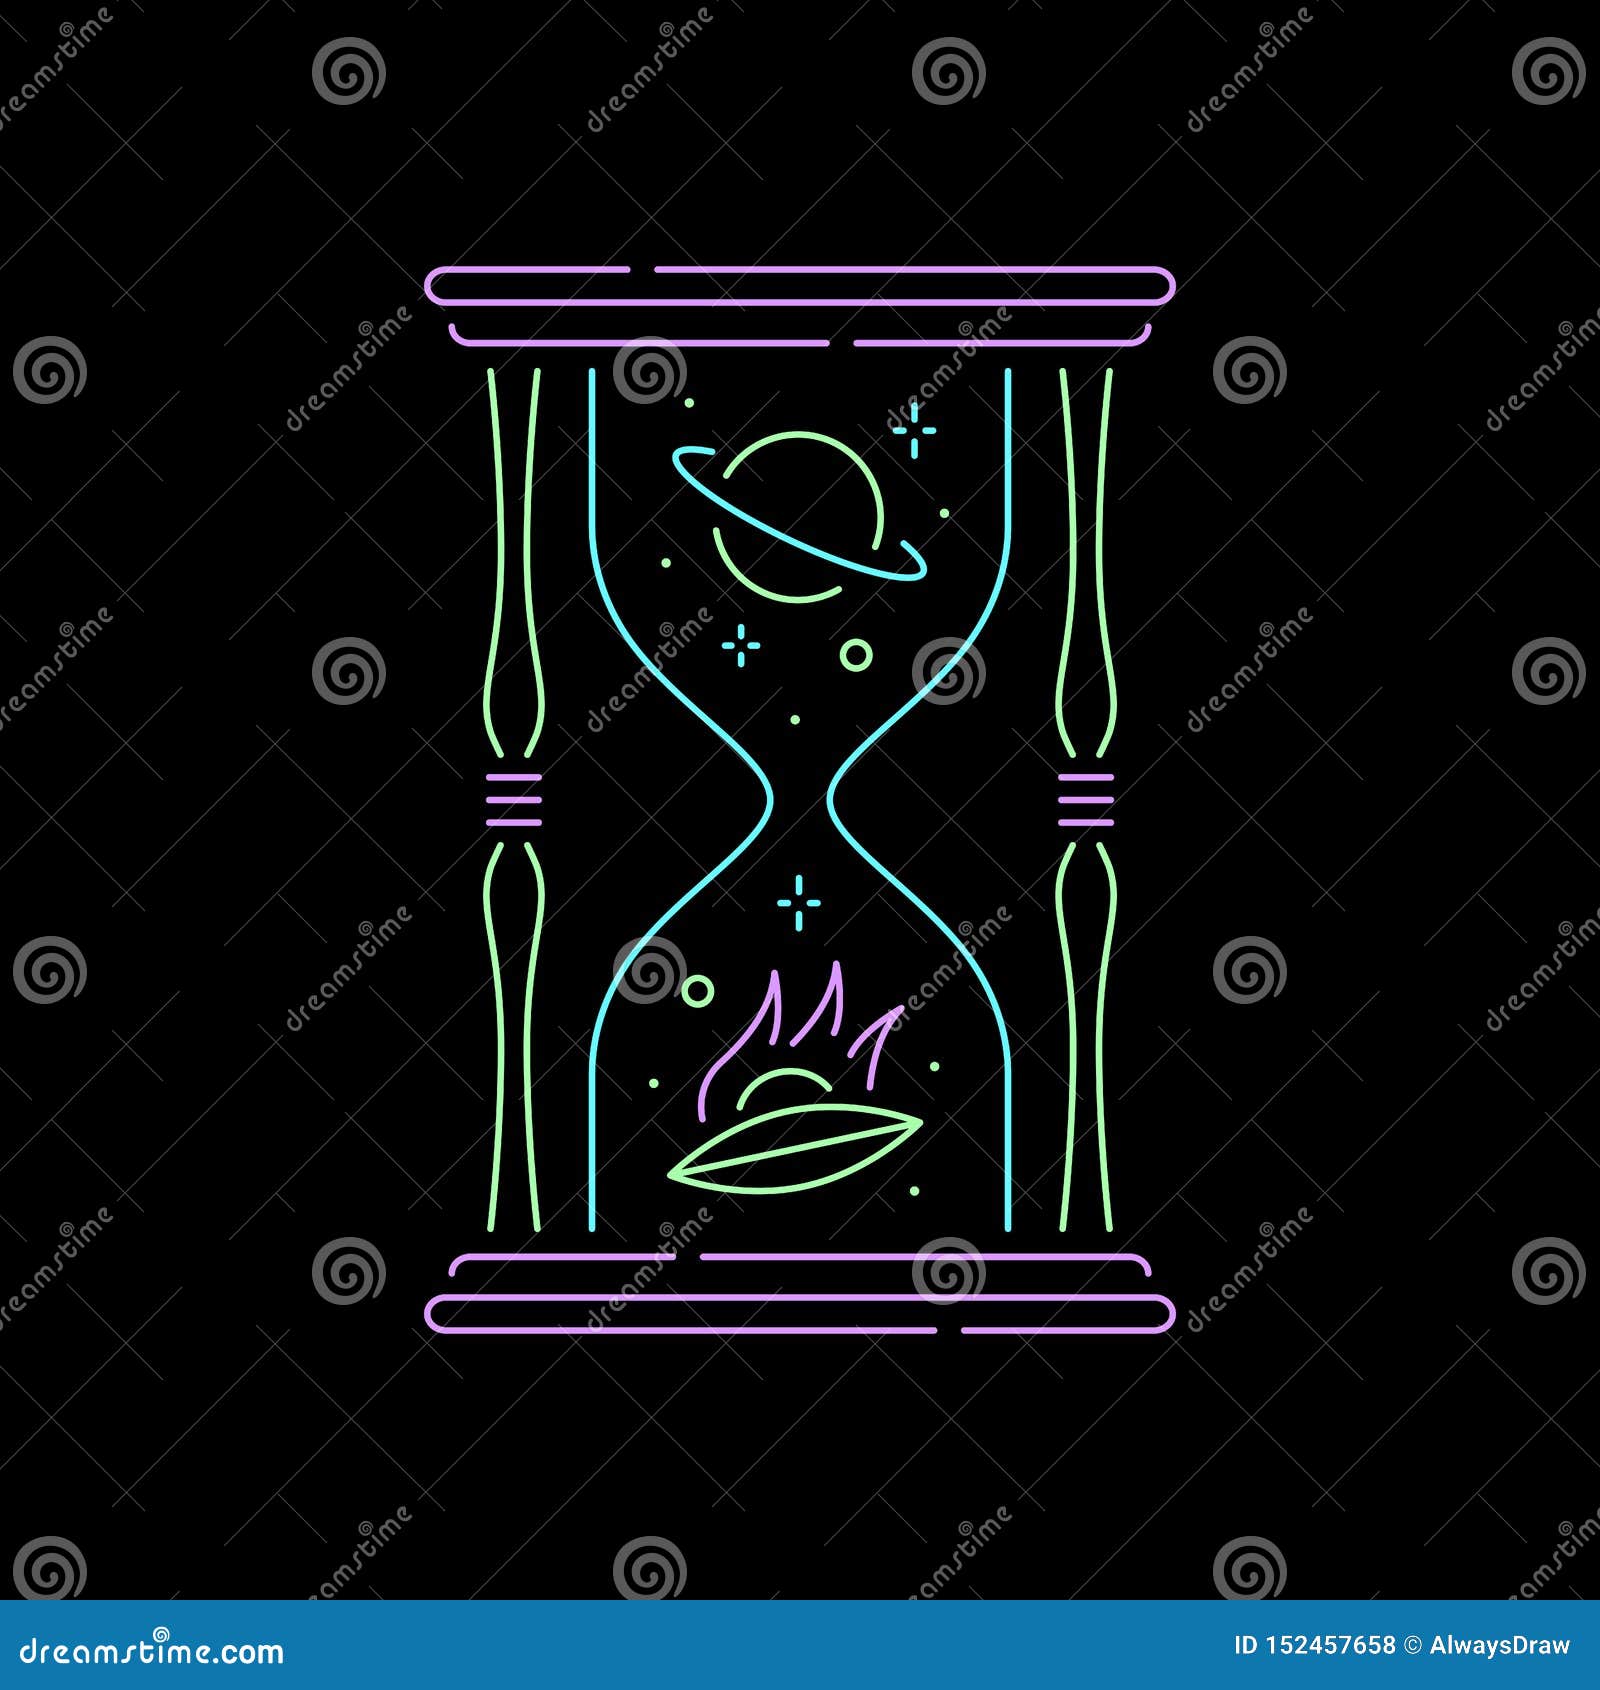 hourglass space color neon badge black